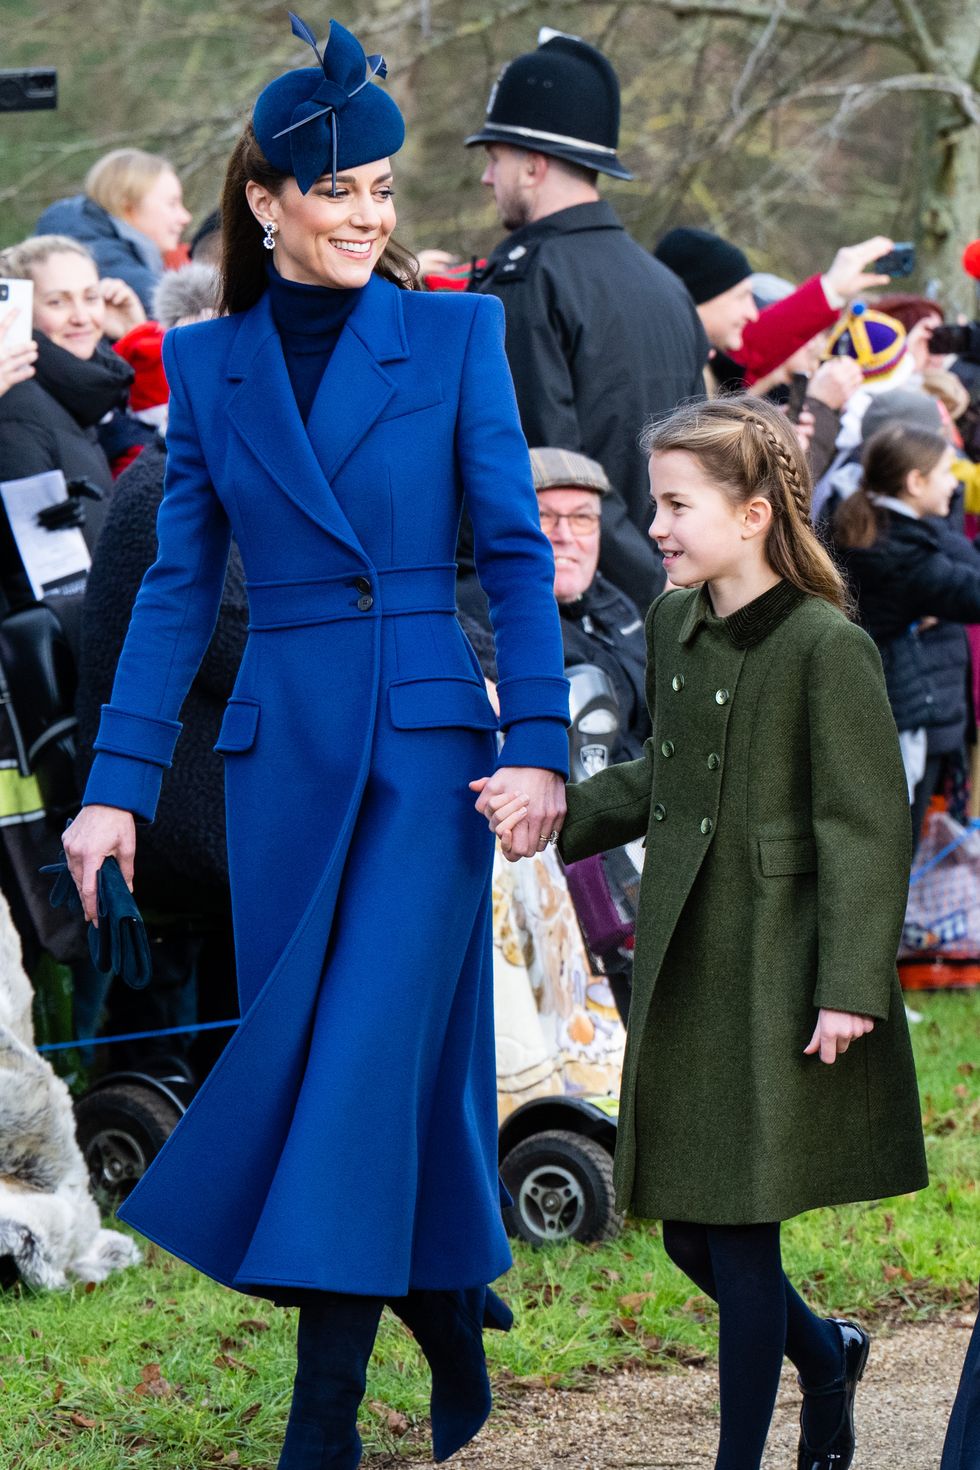 sandringham, norfolk december 25 catherine, princess of wales and princess charlotte of wales attend the christmas morning service at sandringham church on december 25, 2023 in sandringham, norfolk photo by samir husseinwireimage